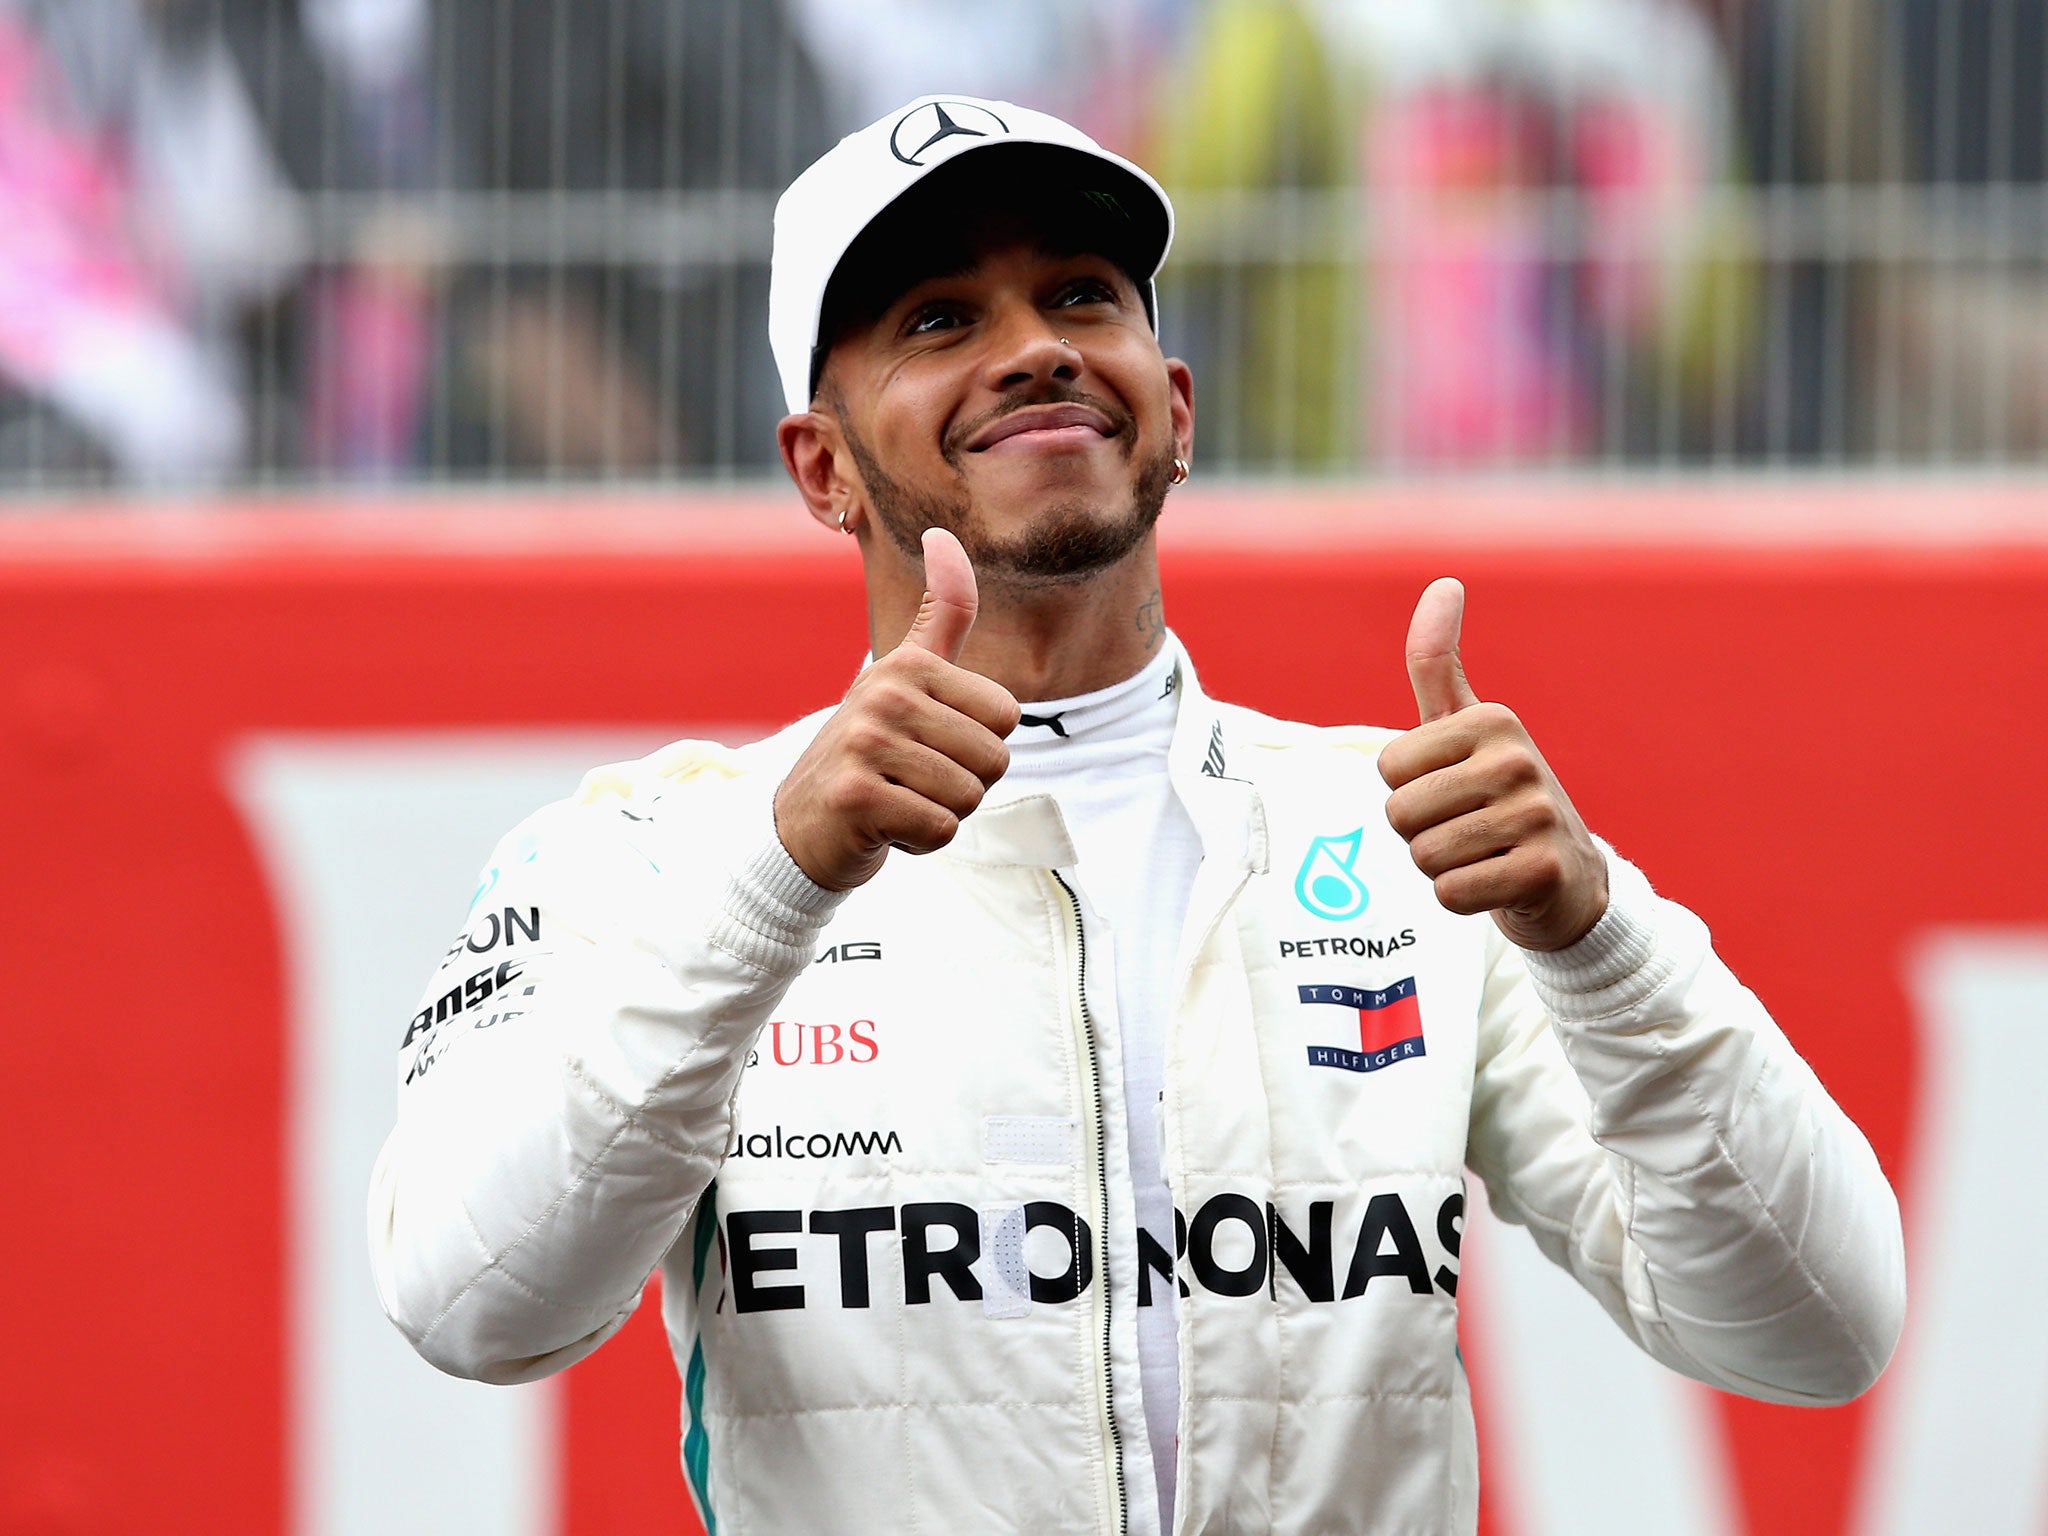 Hamilton produced when it mattered and will start Sunday's race from pole